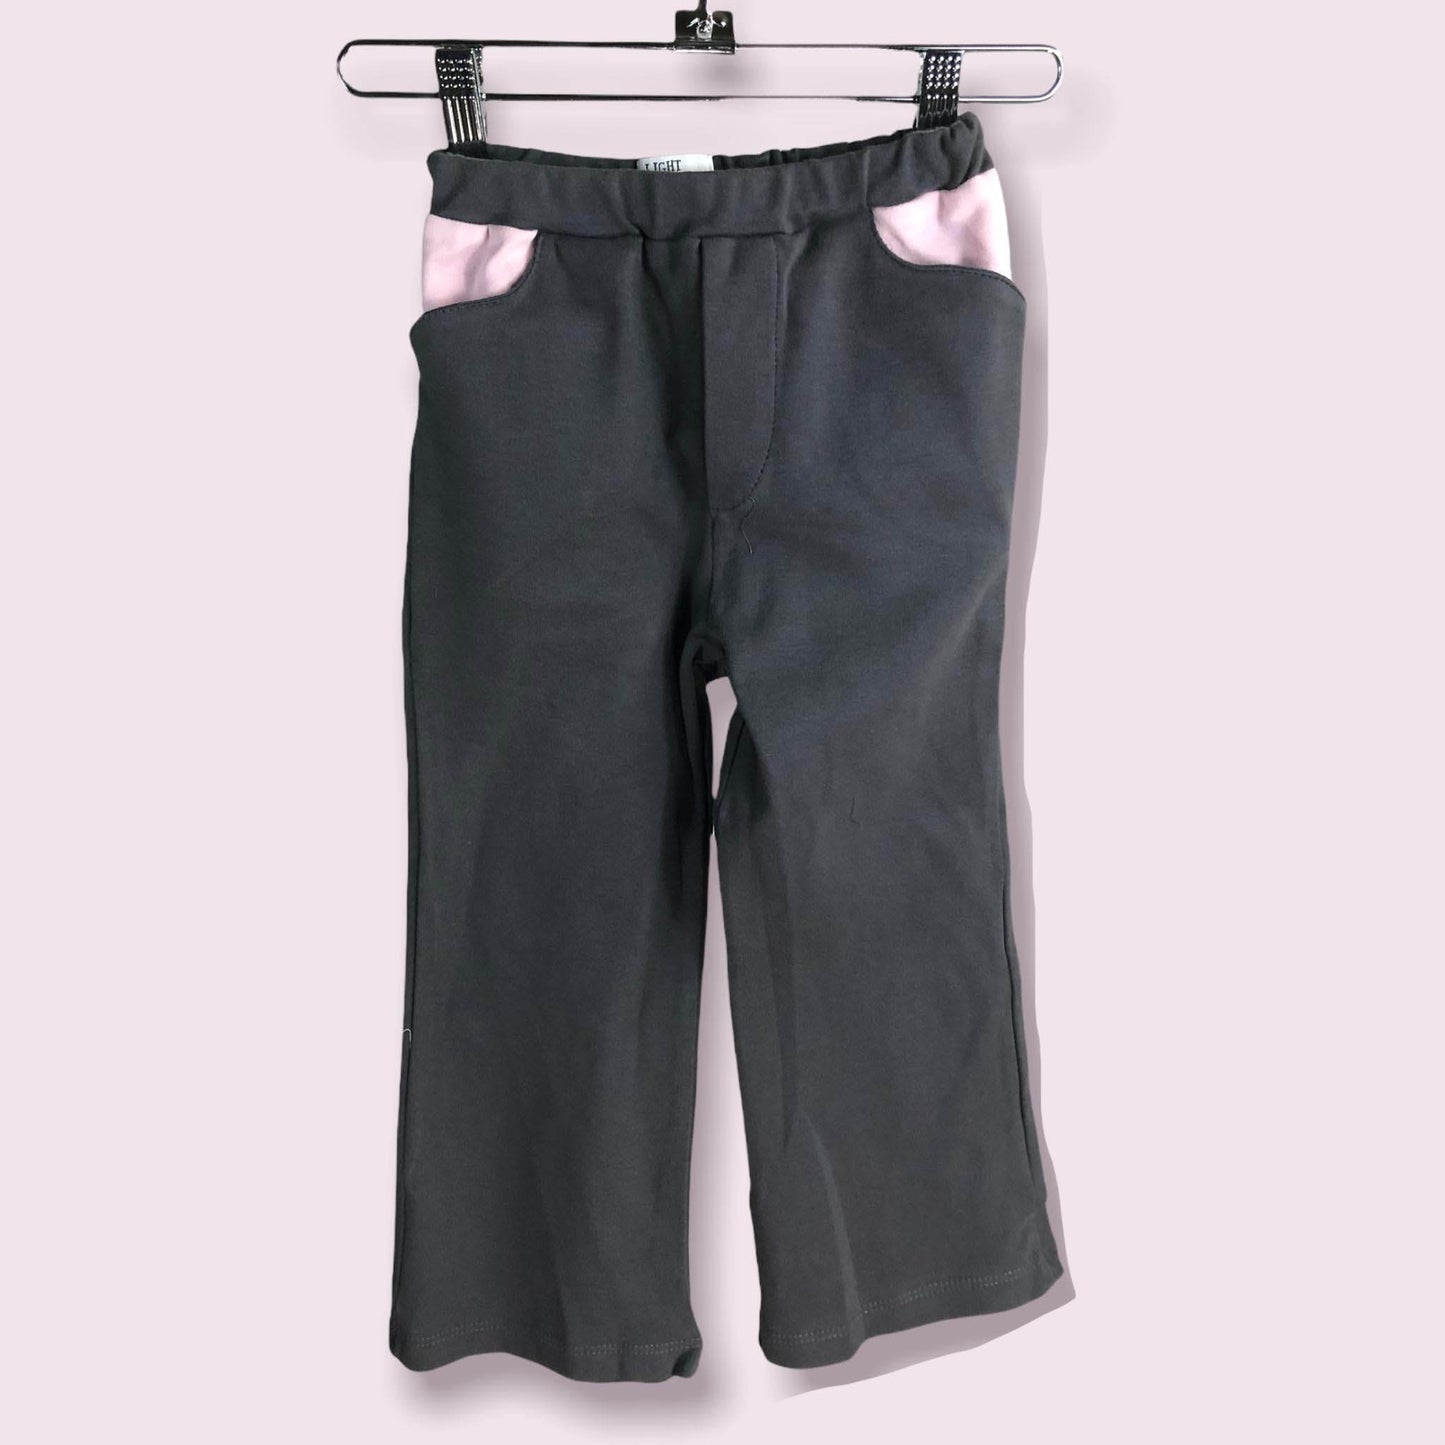 Organic Cotton Toddler Comfy Pants With Pockets-2T-Grey